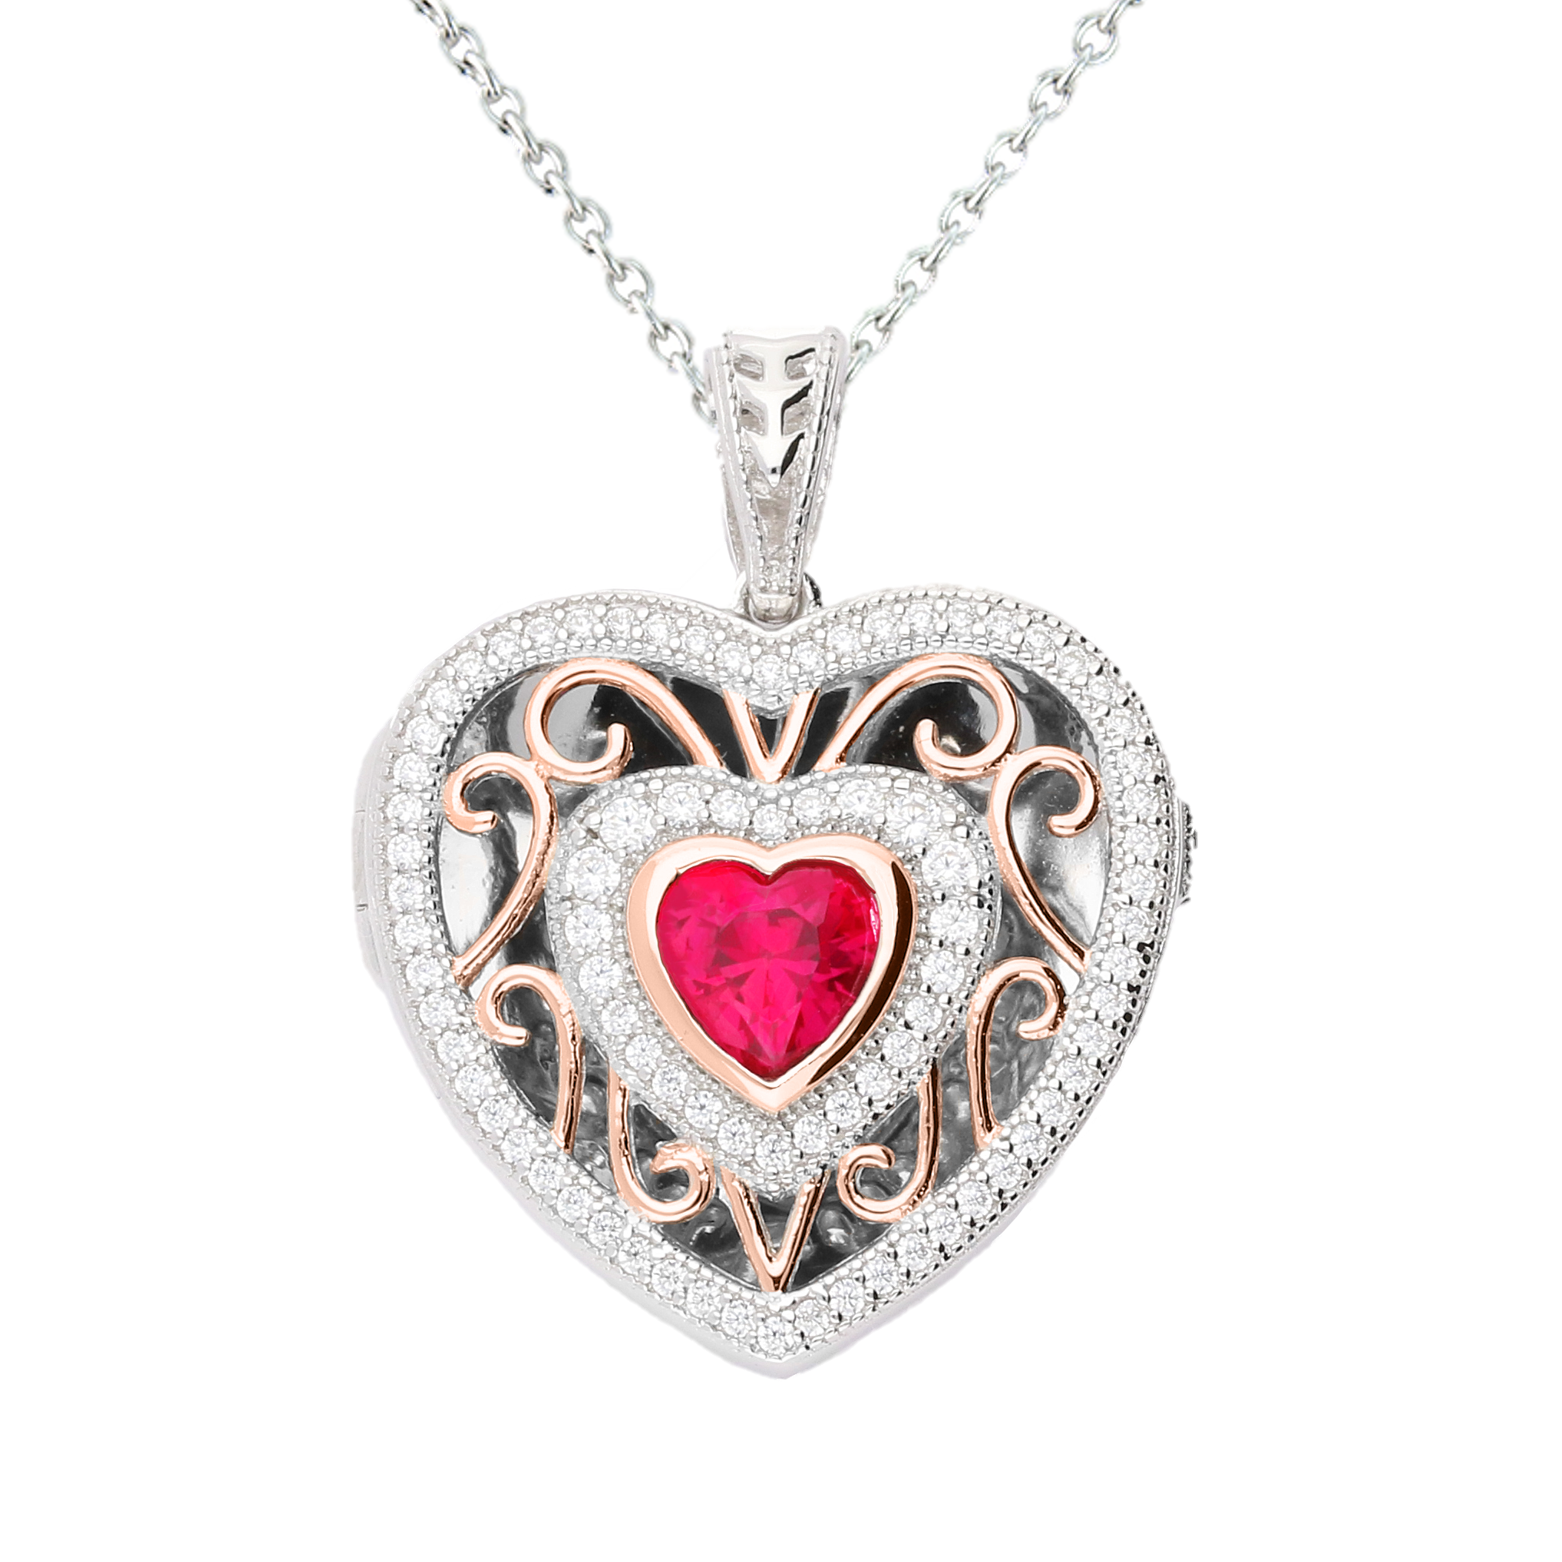 Lola Locket Silver and rose gold Rosie heart locket Locket Lola Locket   